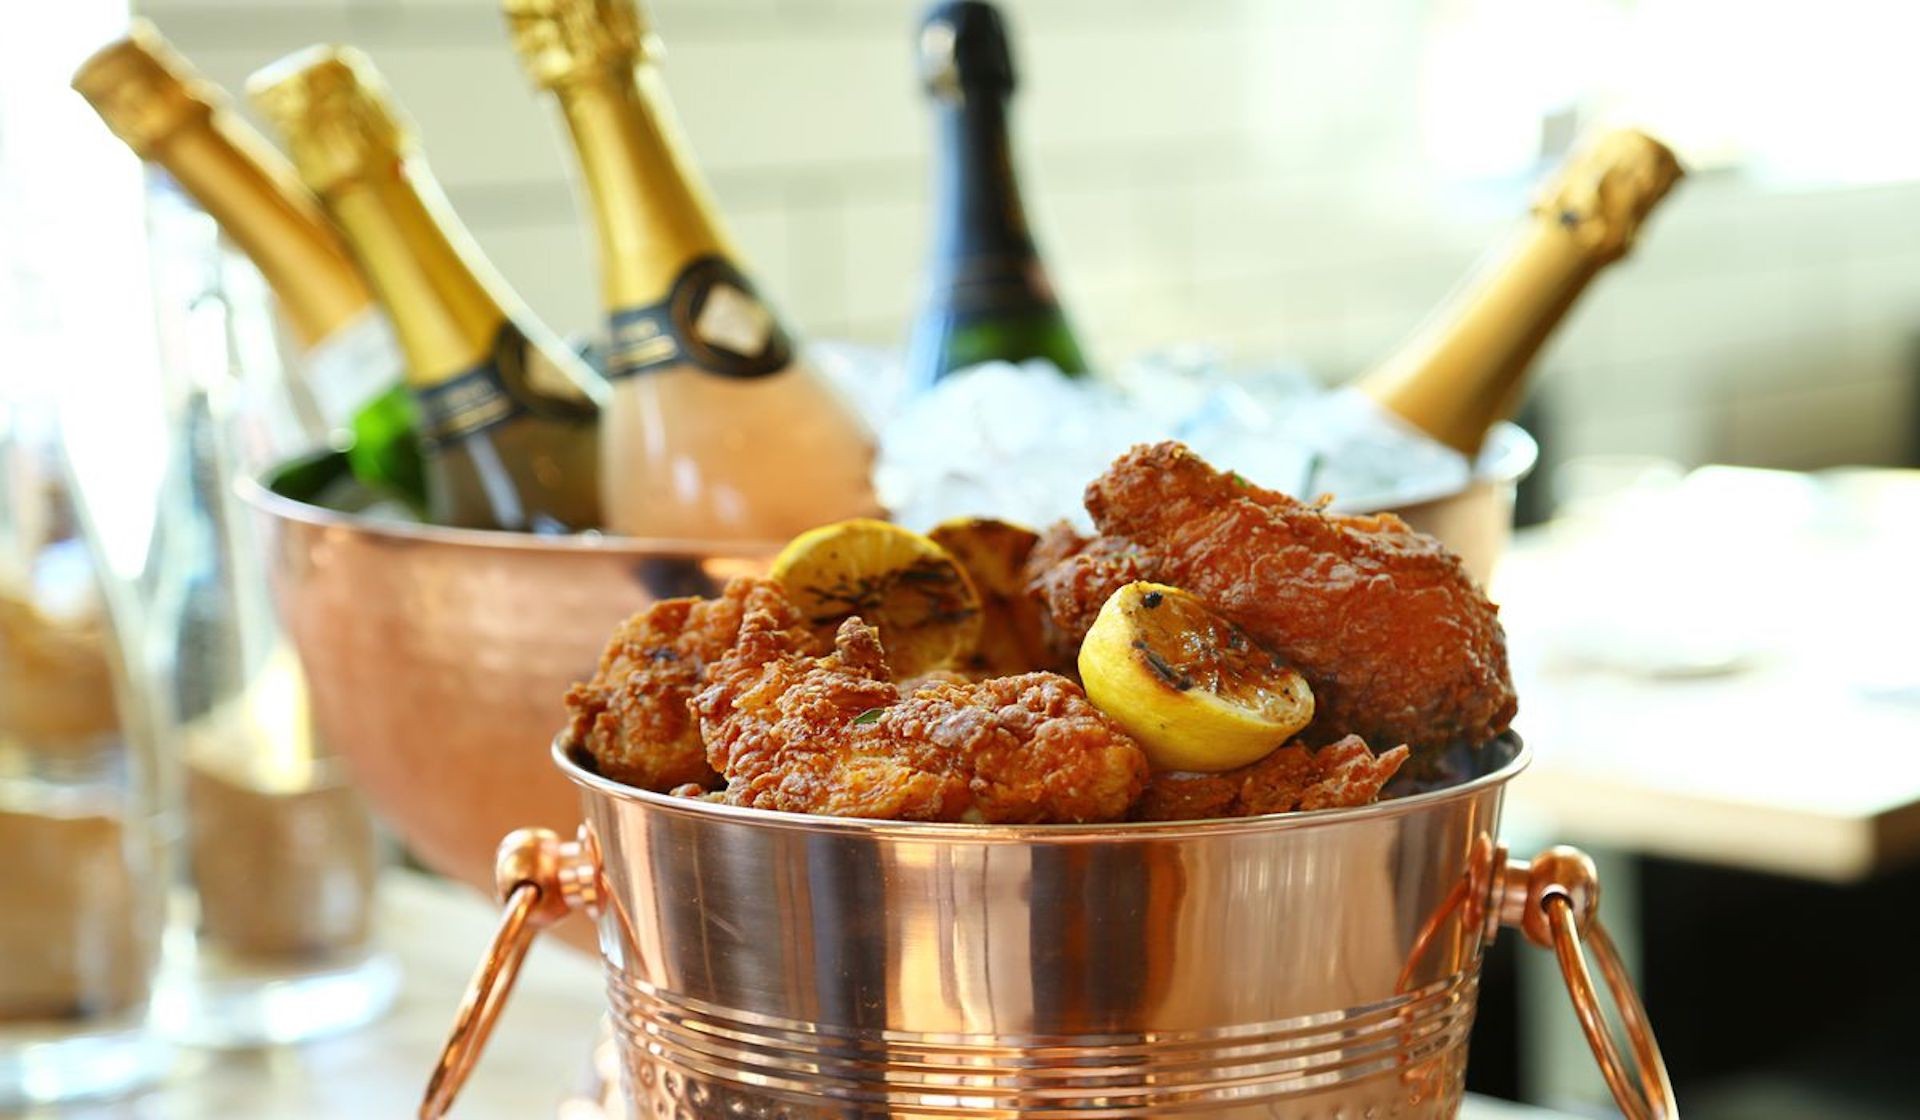 SOBEWFF Presents: Chicken Coupe | Fried Chicken and Champagne hosted by Kardea Brown